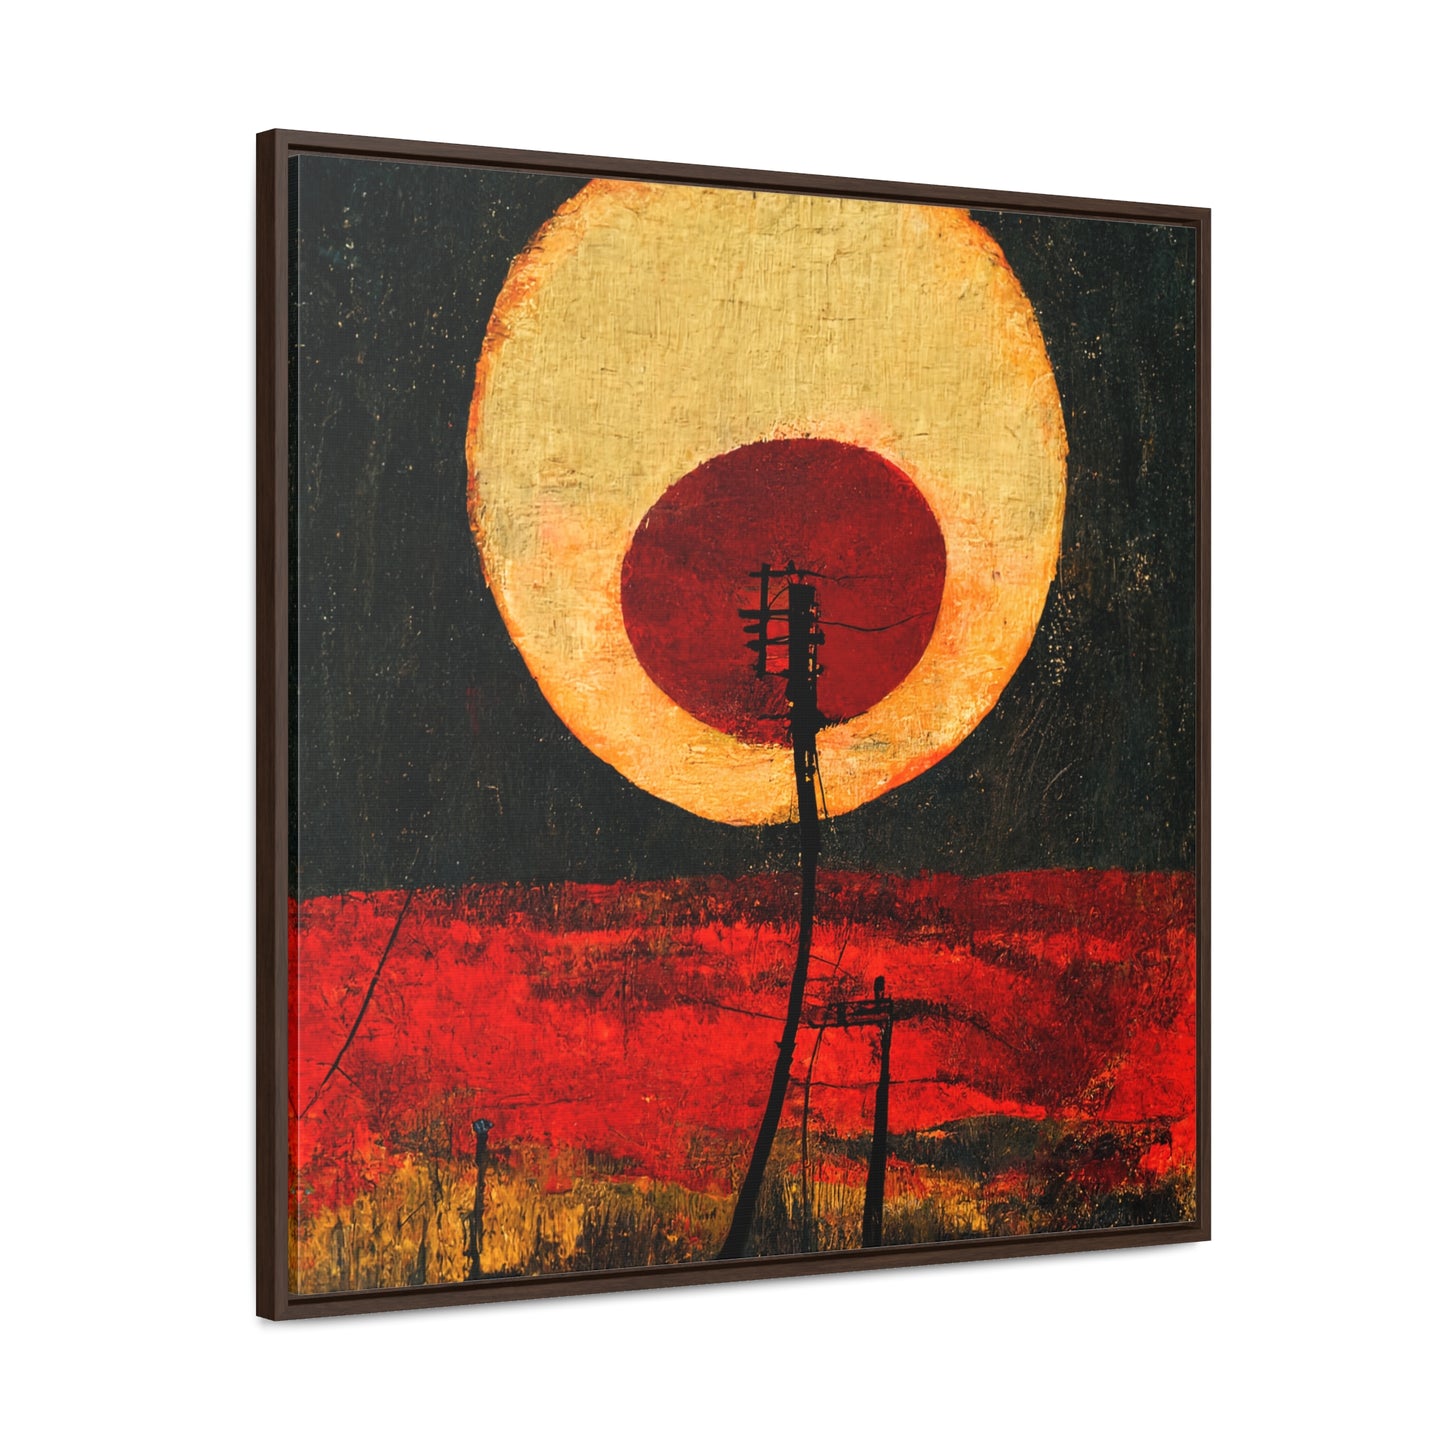 Land of the Sun 27, Valentinii, Gallery Canvas Wraps, Square Frame